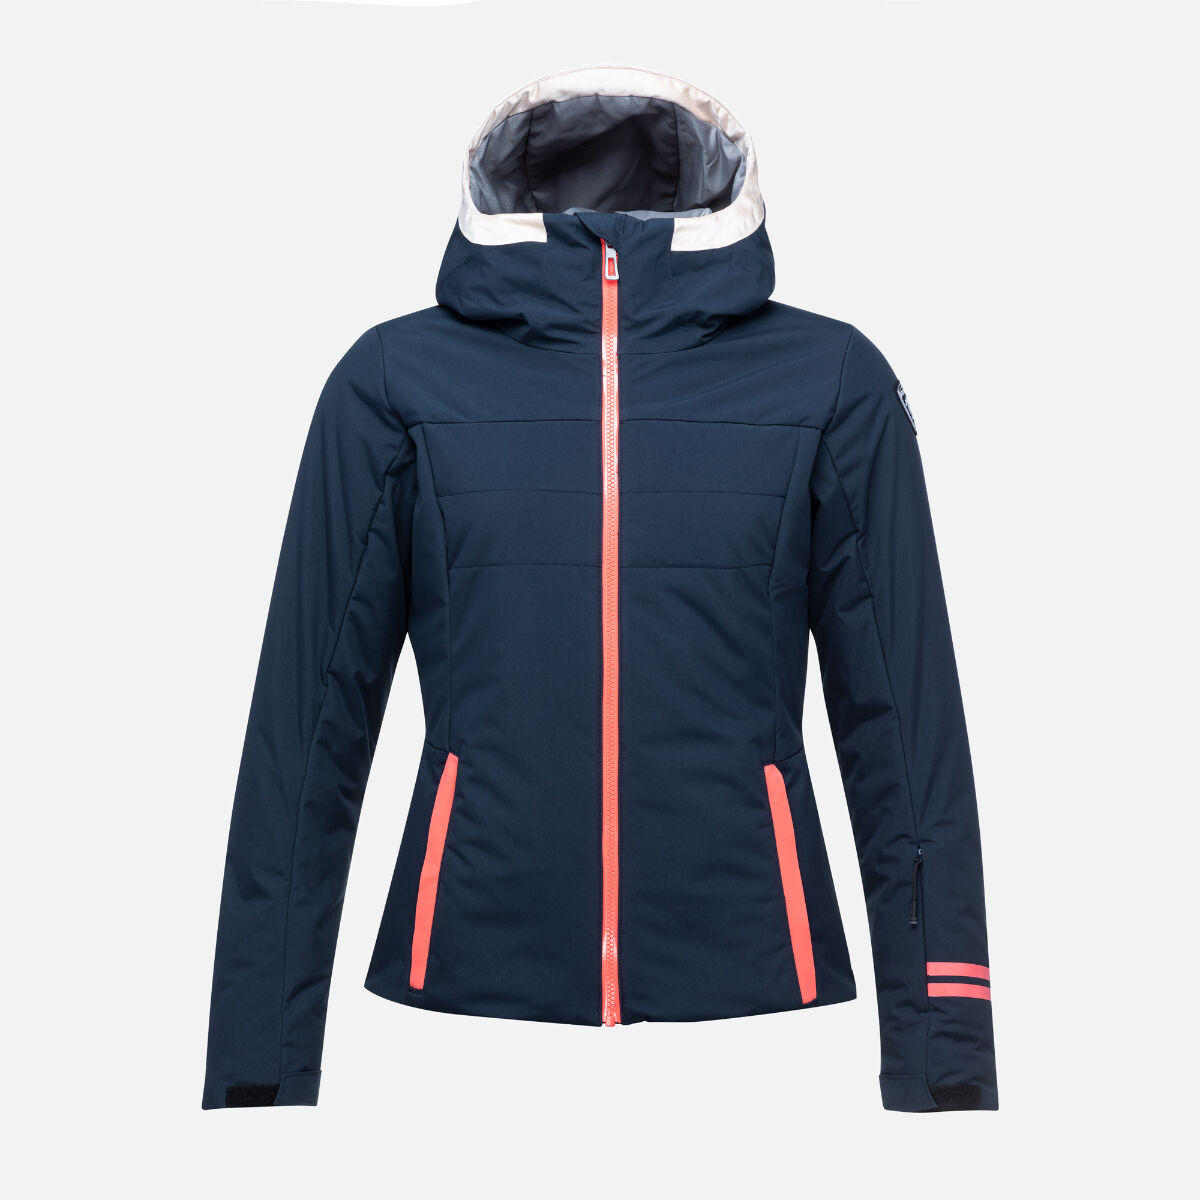 style-womens.com : Clearance - Rossignol Courbe Jacket Womens Sales Up 51%